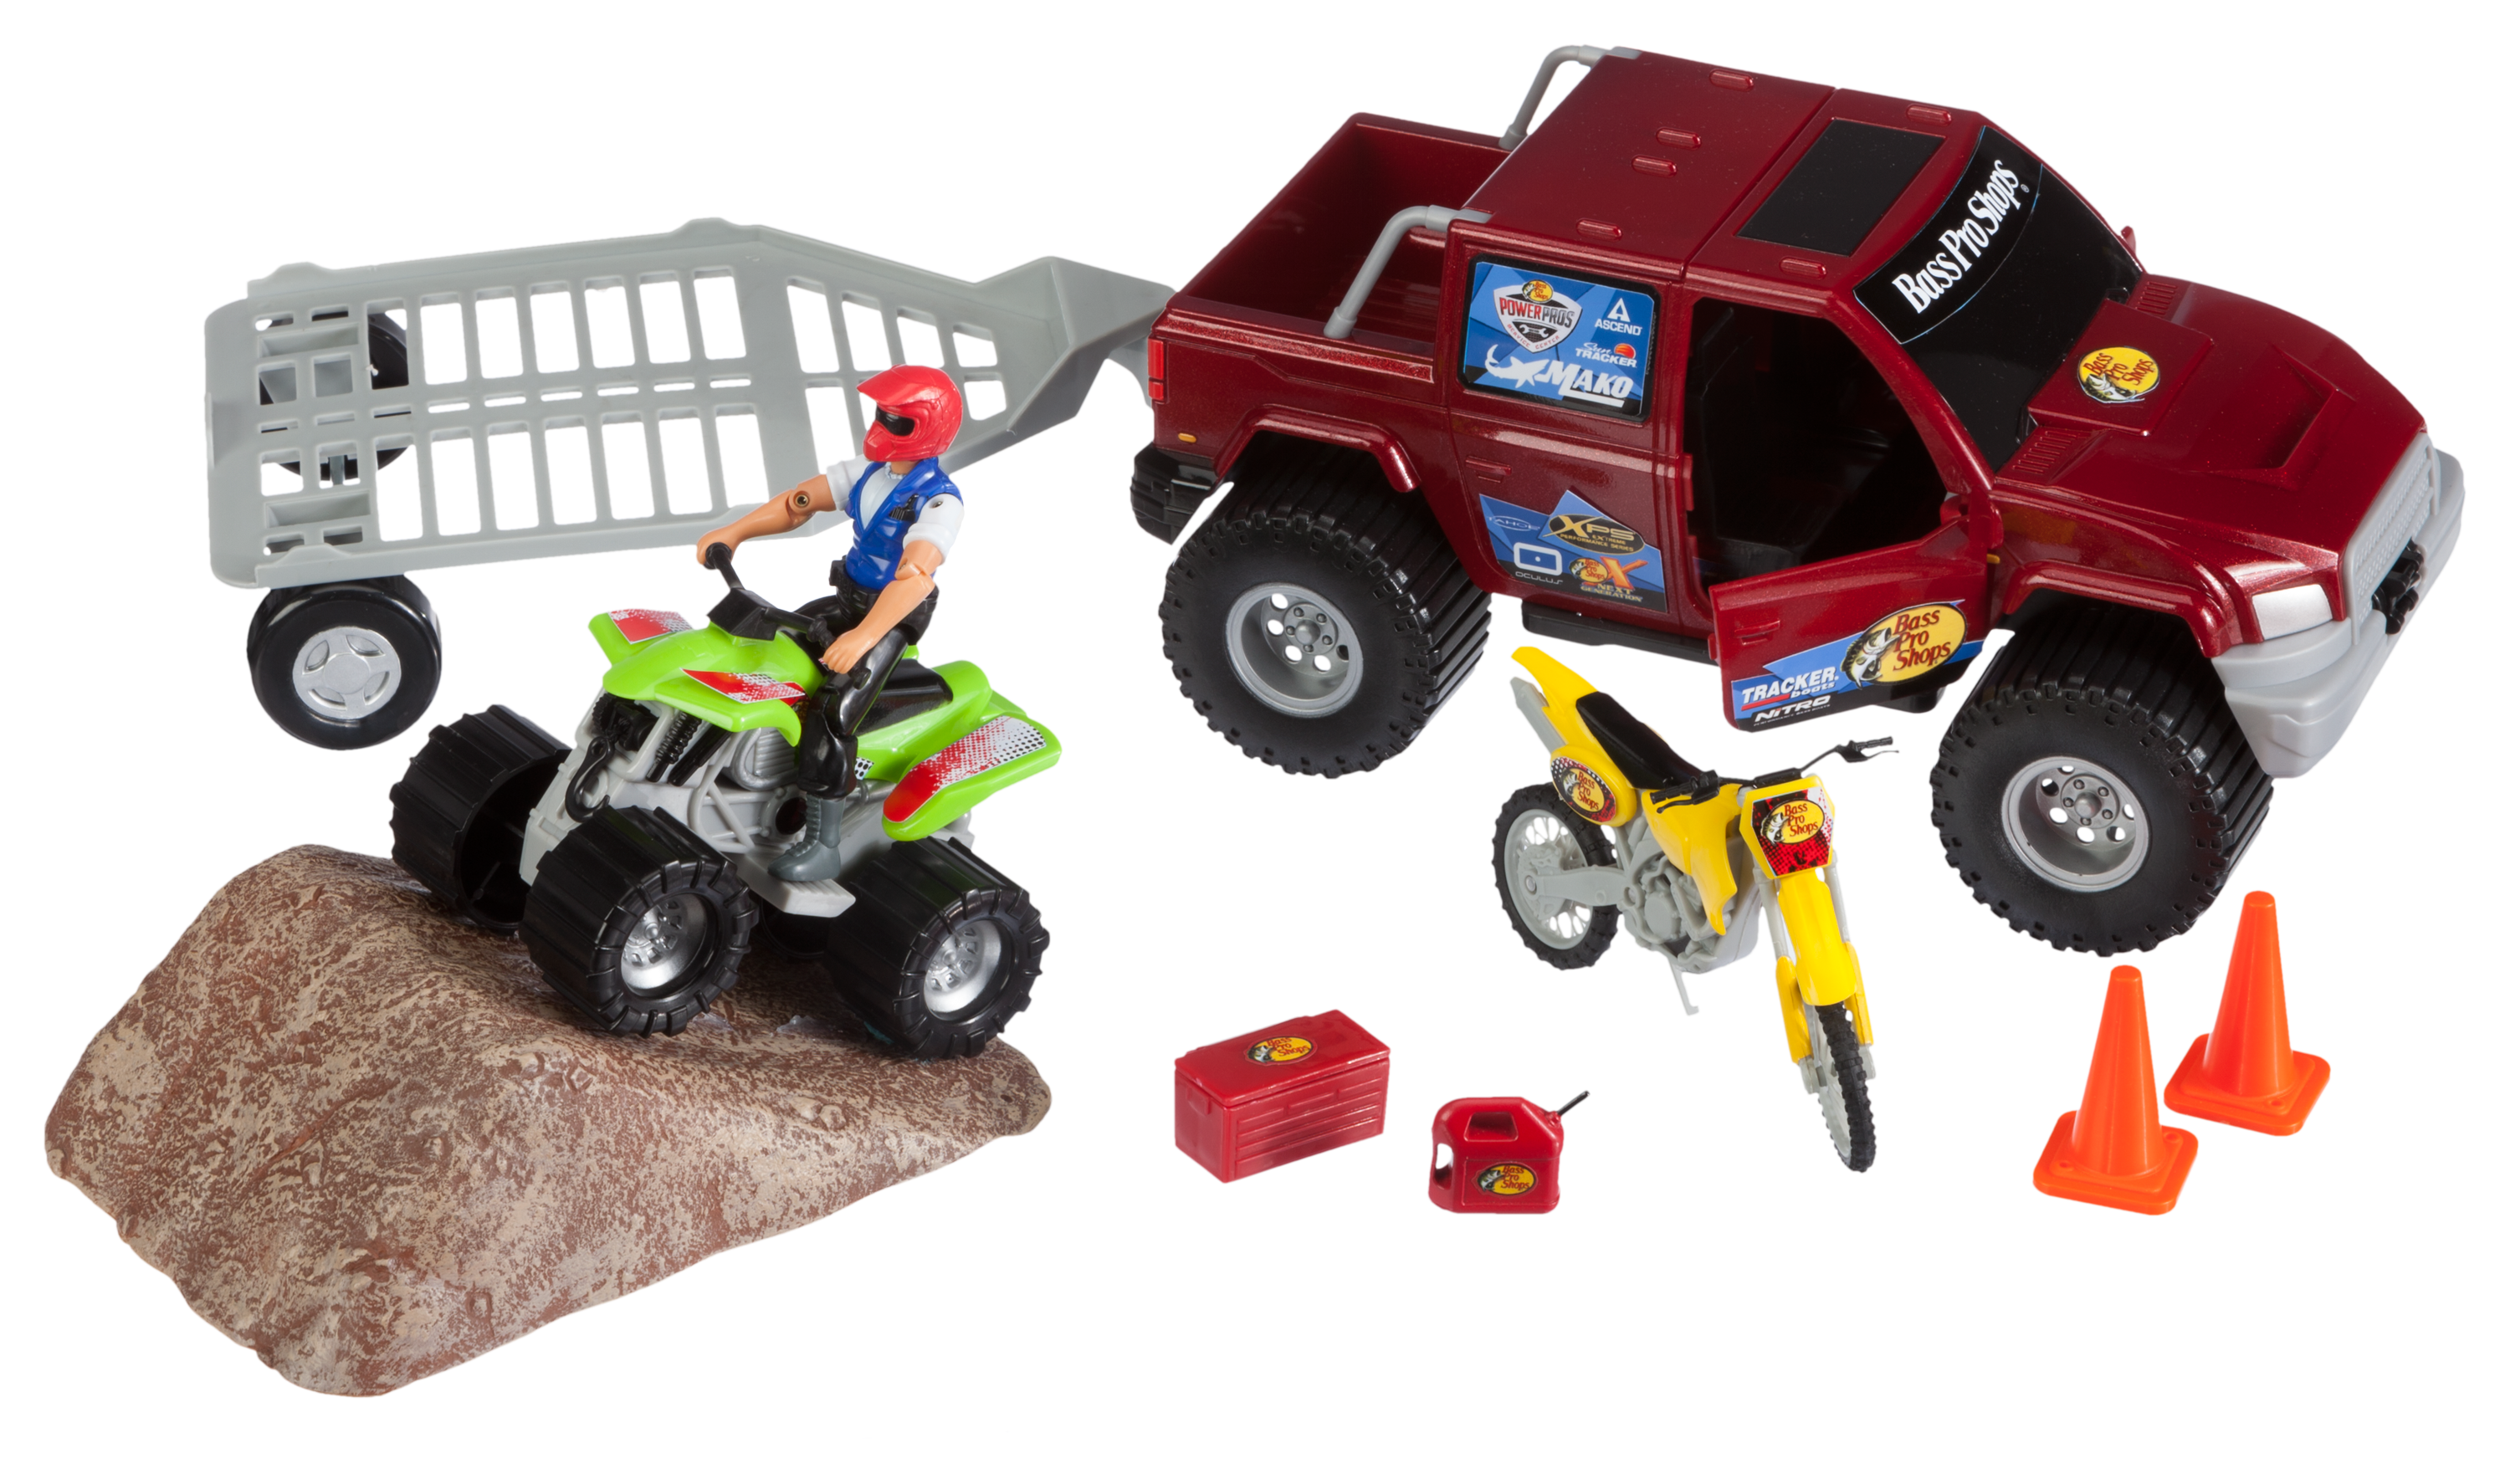 Bass Pro Shops Deluxe Off-Road Adventure Play Set for Kids